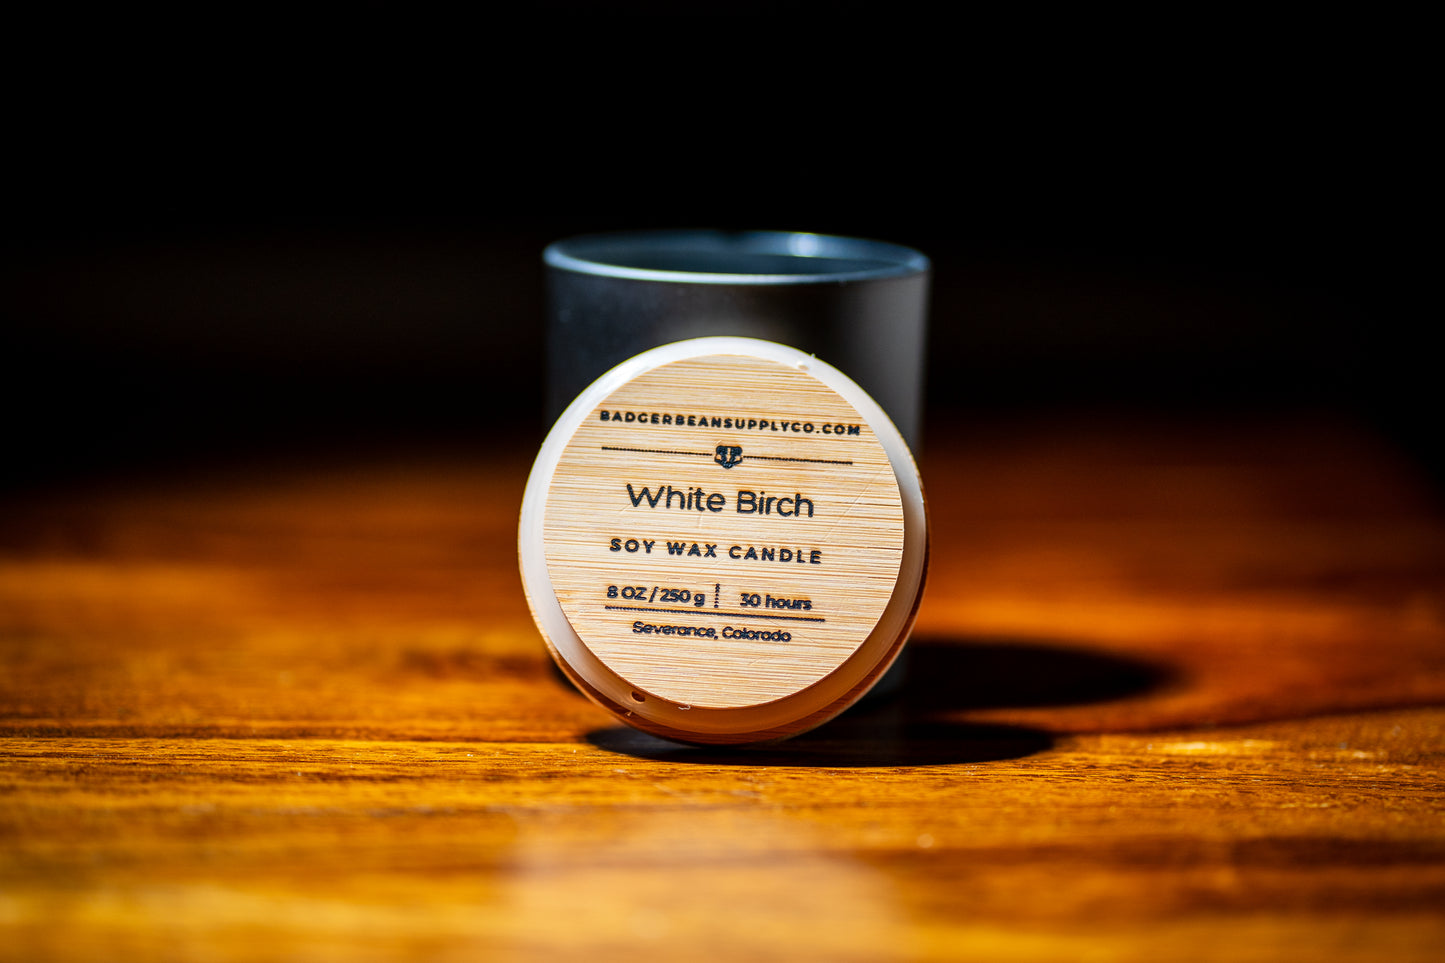 White Birch Soy Wax Candle